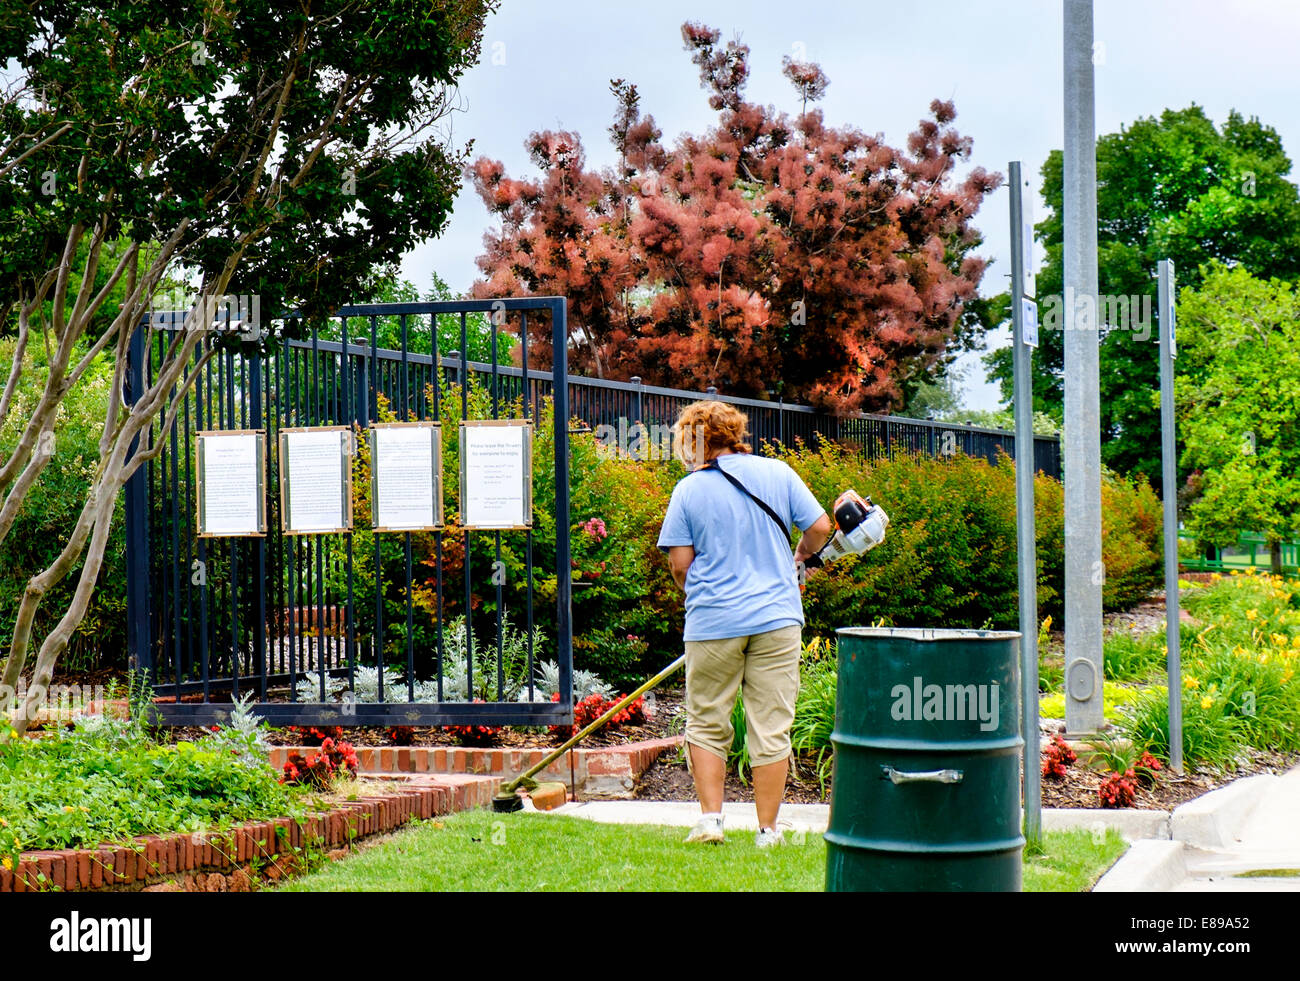 A Caucasian woman worker in her 50s uses a weed trimmer in an Oklahoma City, Oklahoma public park. Stock Photo